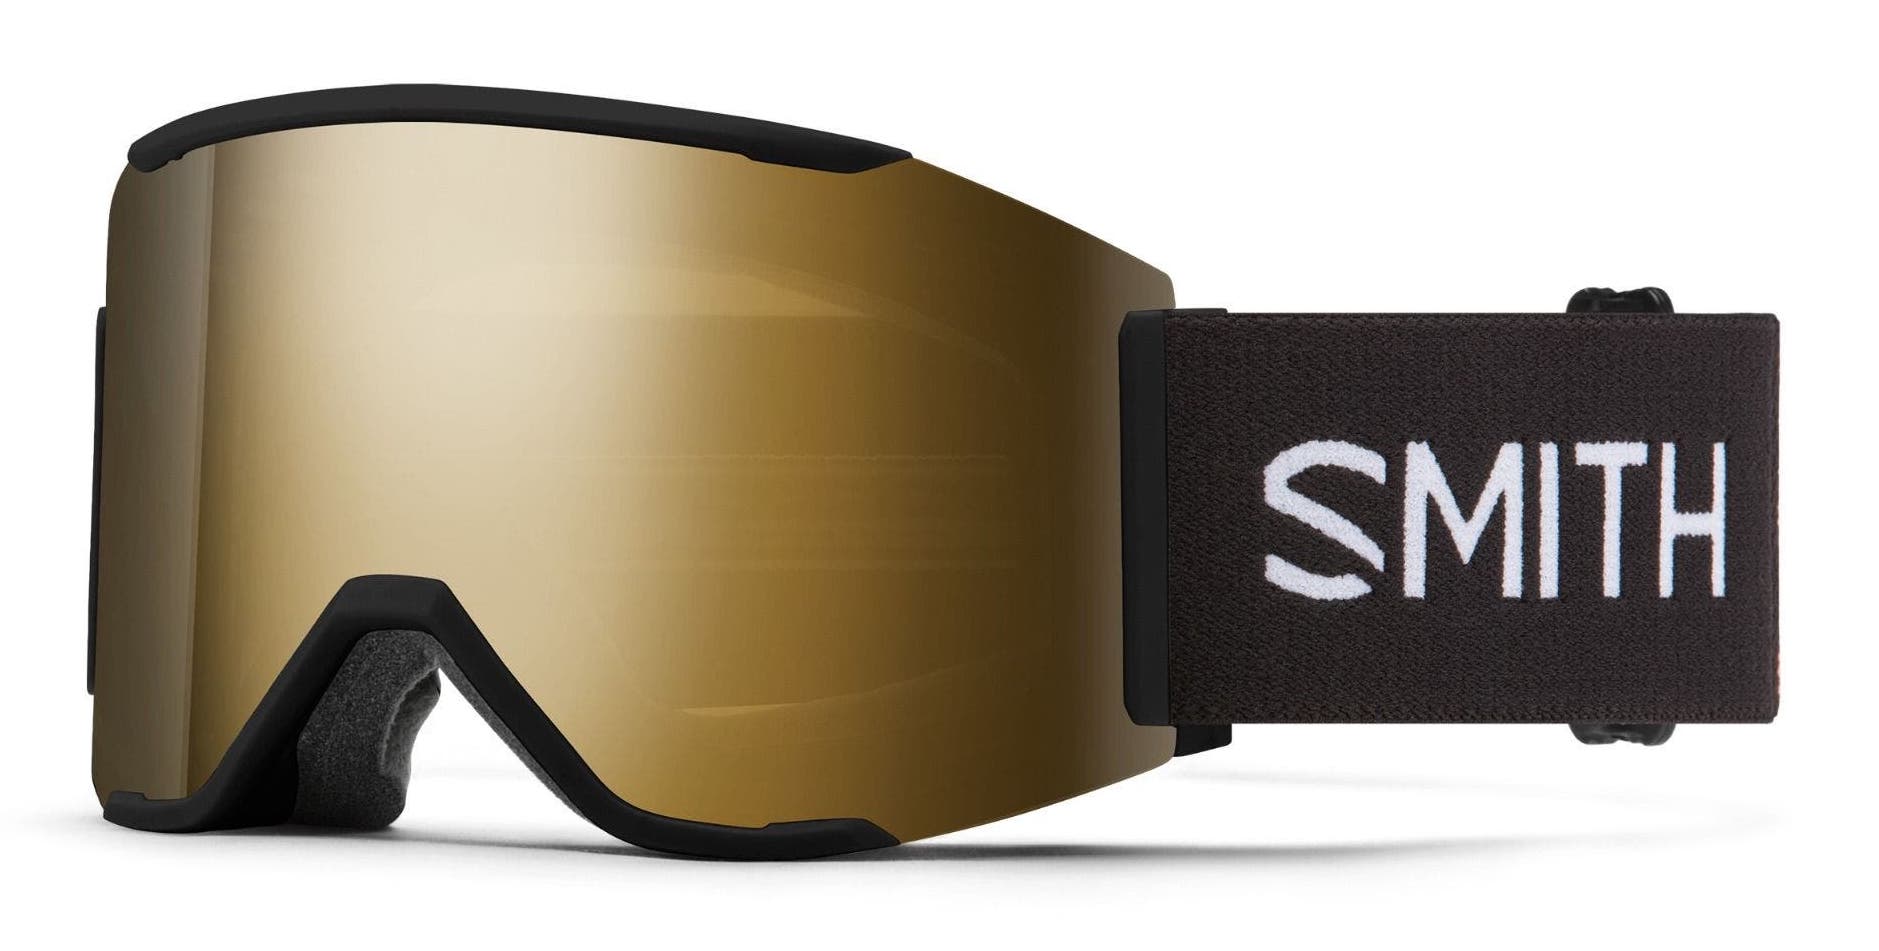 SMITH Squad MAG ski & snow goggle in black with white SMITH lettering on strap. Shield lens features ChromaPop gold mirror.